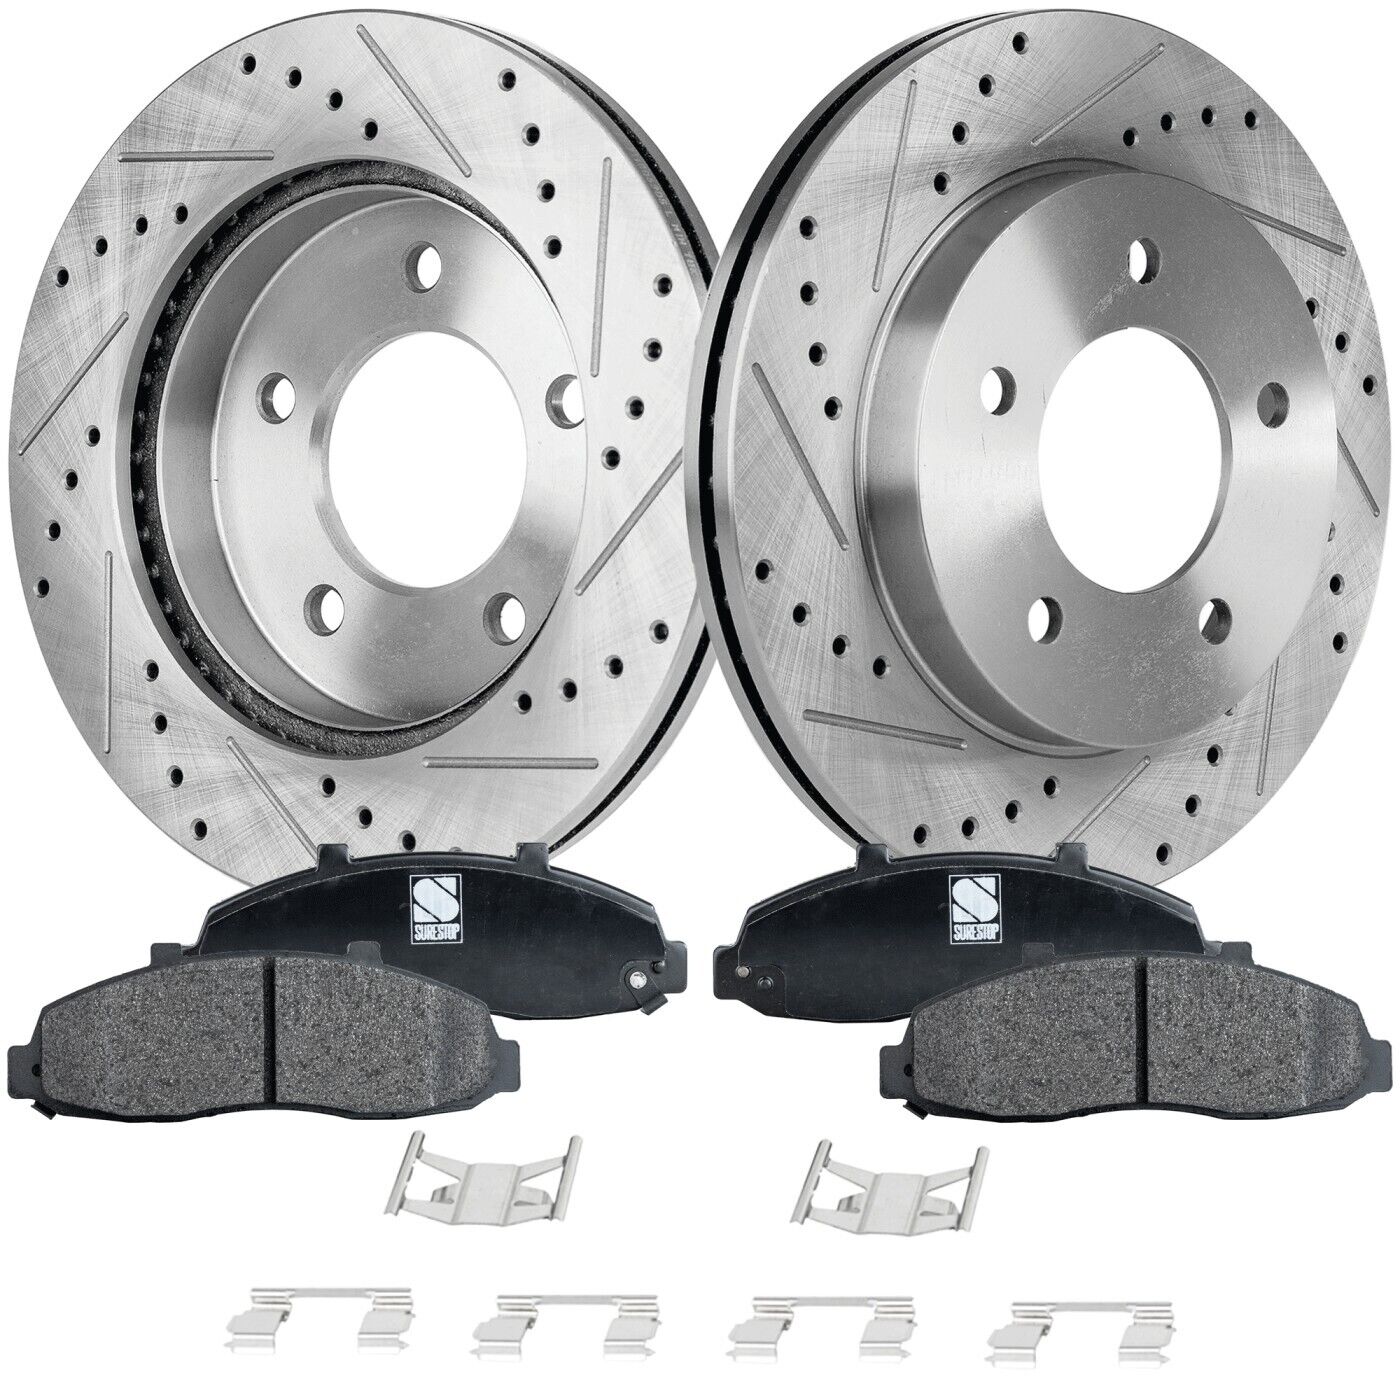 Front Brake Disc Rotor and Pad Kit For 1997-2003 Ford F-150 4WD with Hardware